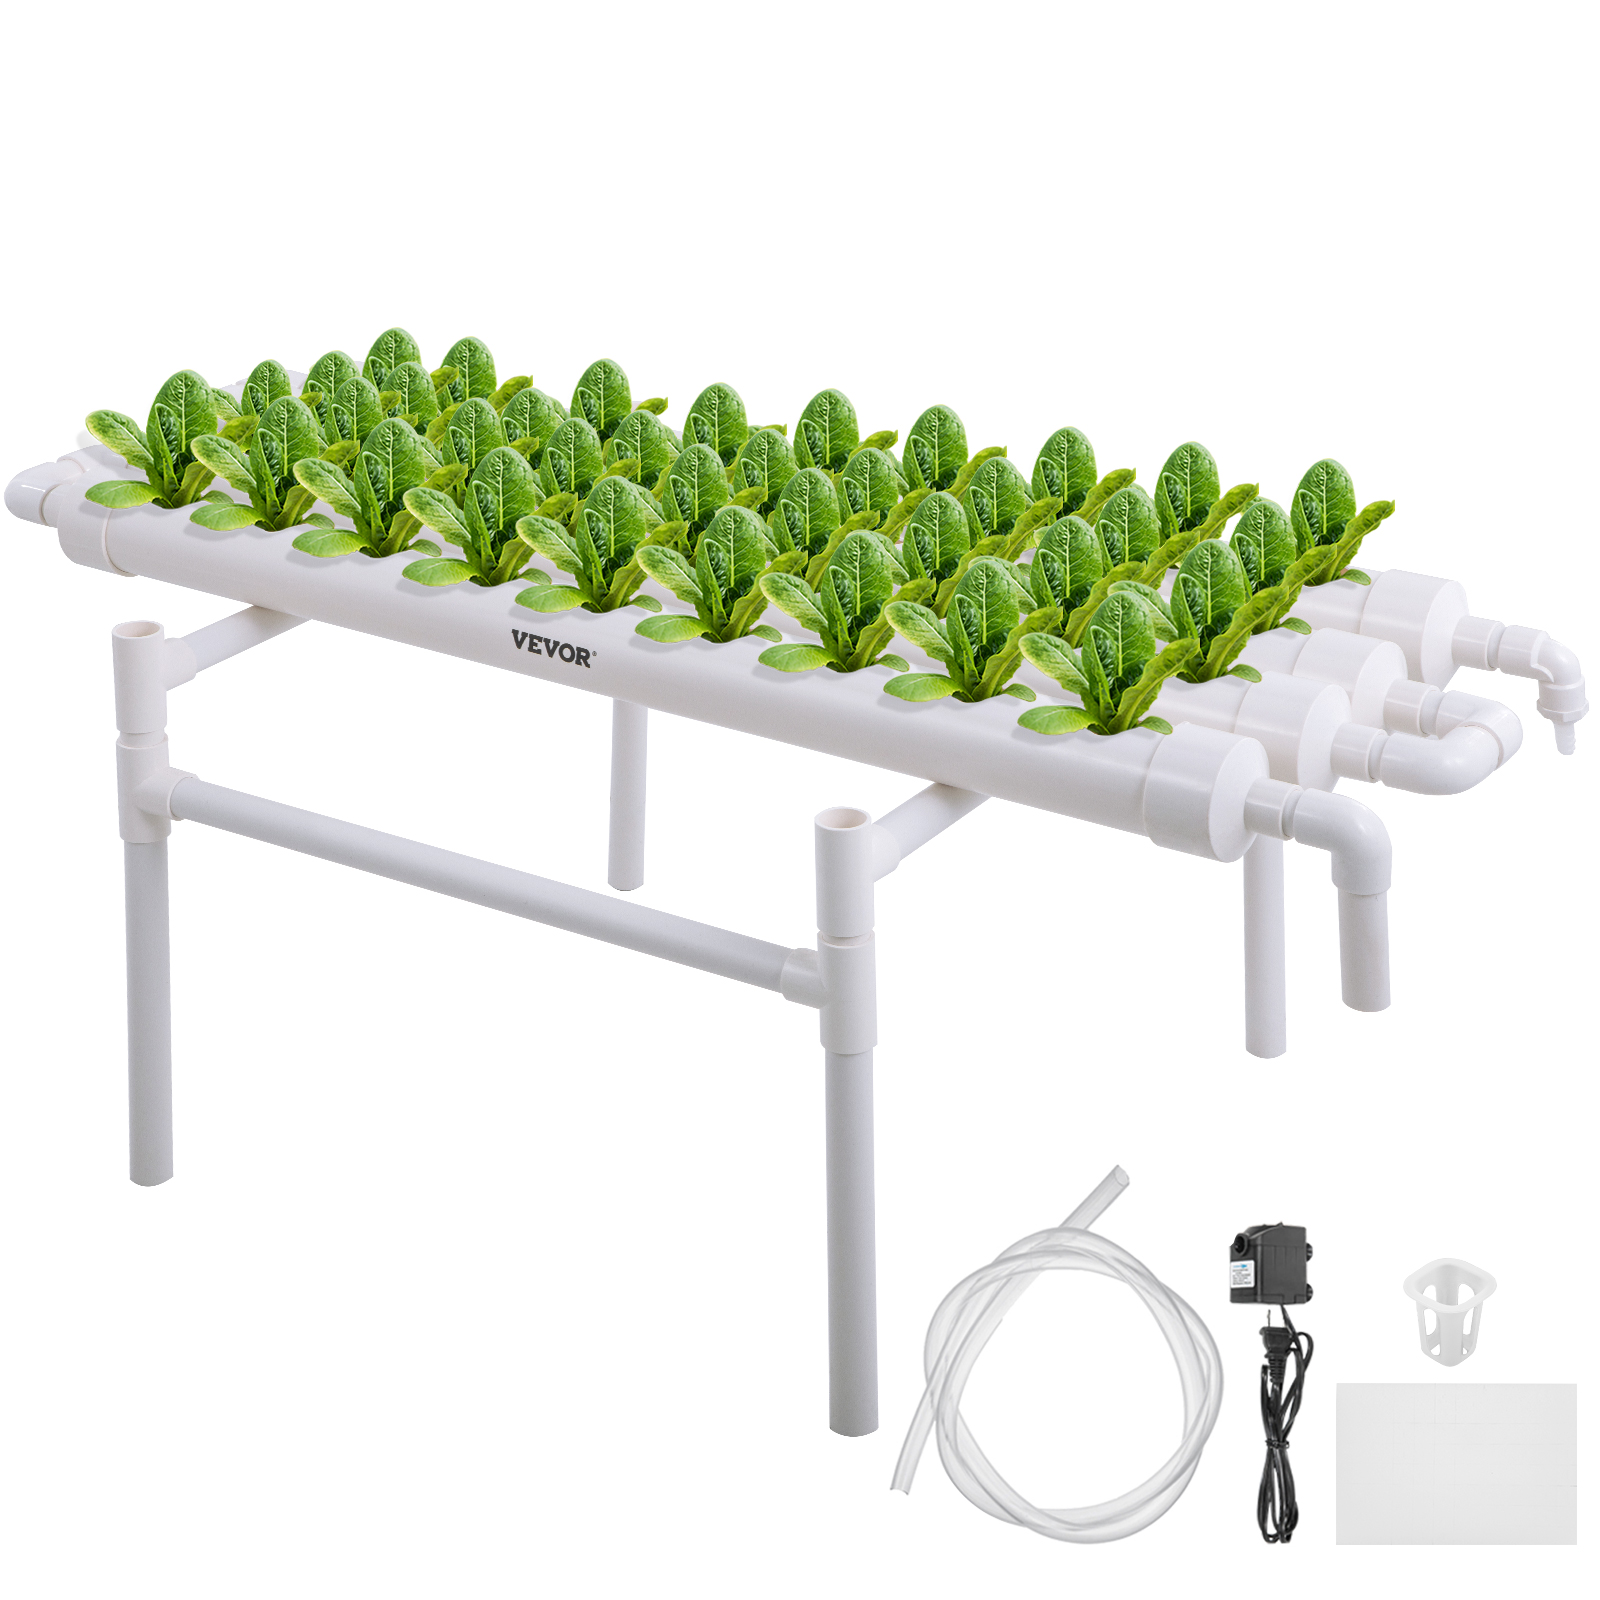 Details about   High Quality Terrace Type Hydroponic 36 Plant Site Grow Kit Vegetable Gardening 